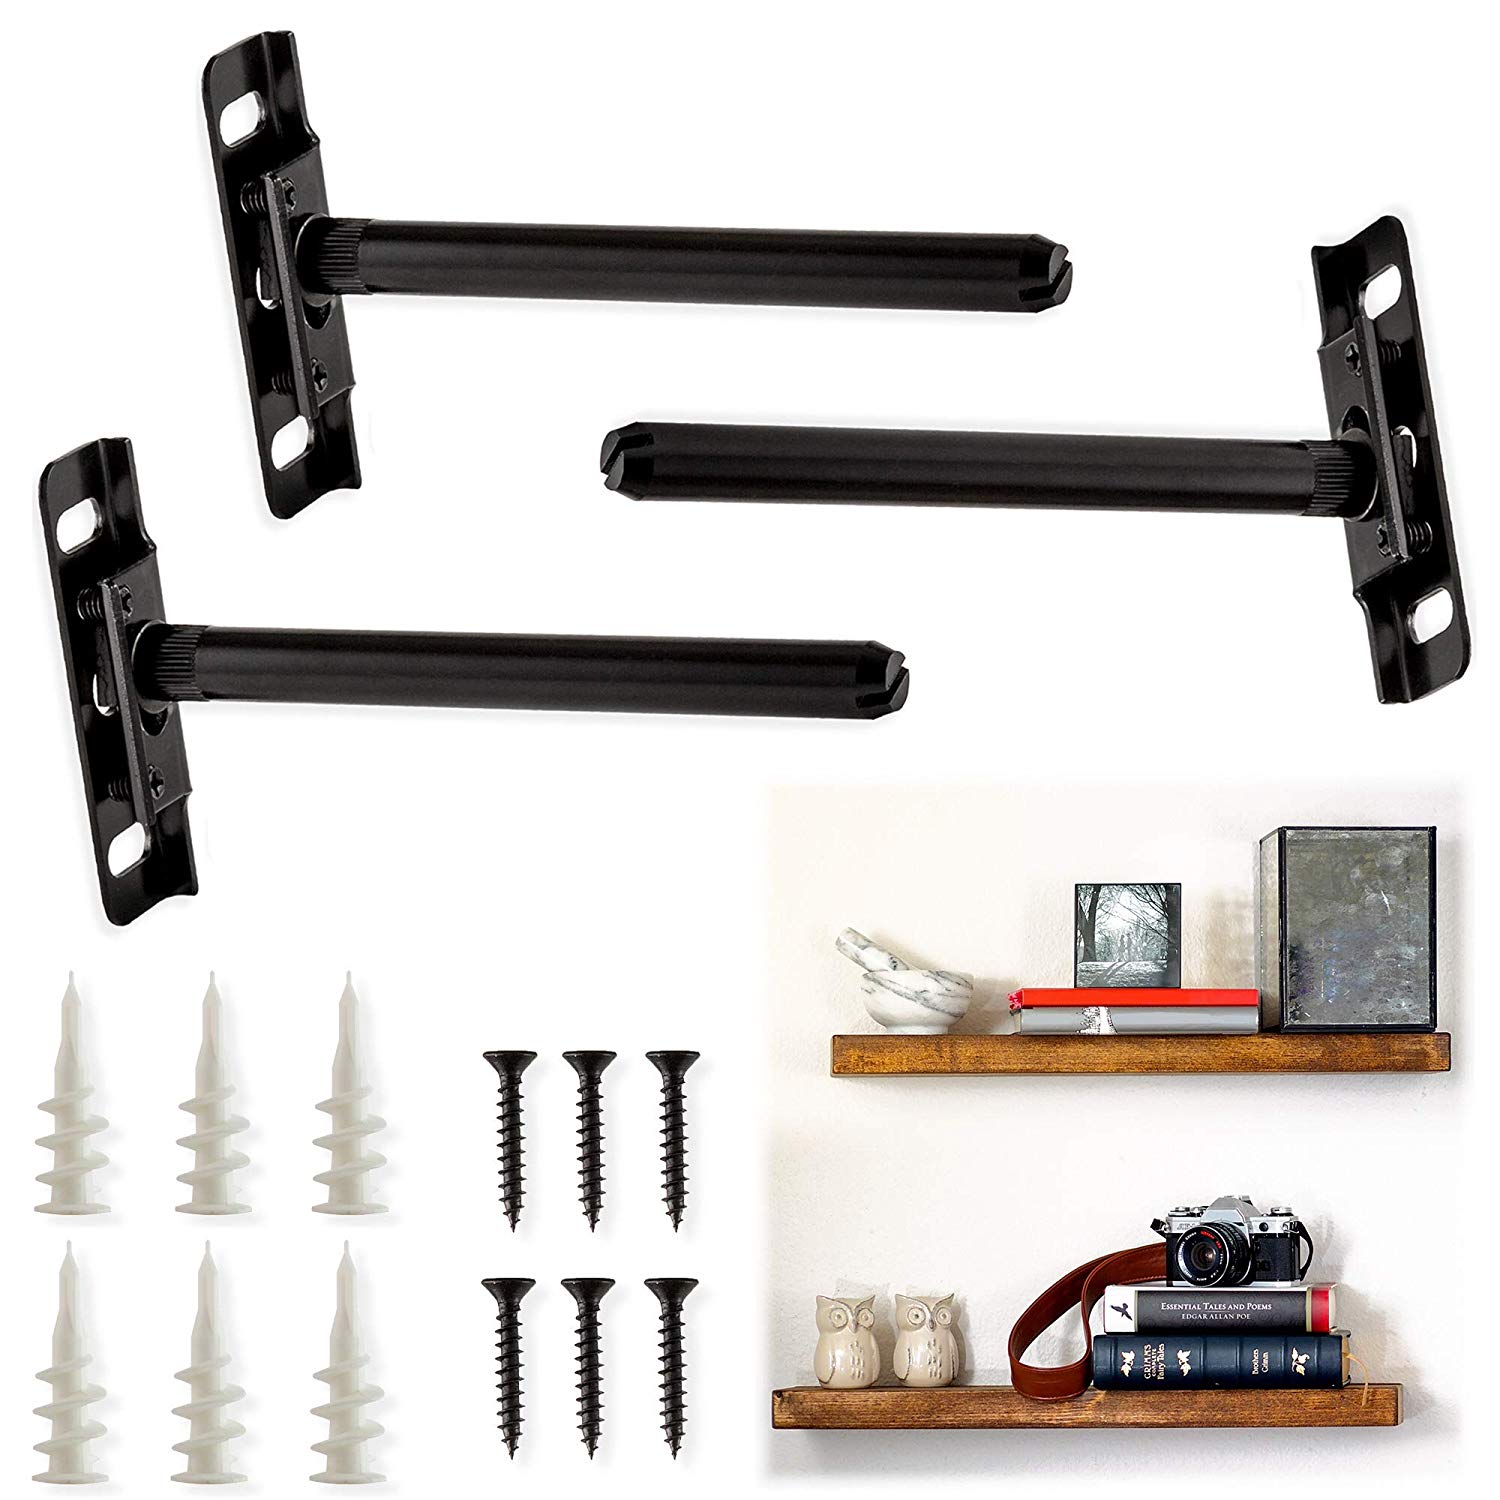 flexibolt adjustable floating shelf bracket pack concealed mounting invisible heavy duty wall mount hidden blind support for shelves with screws easy bookshelf home can you put